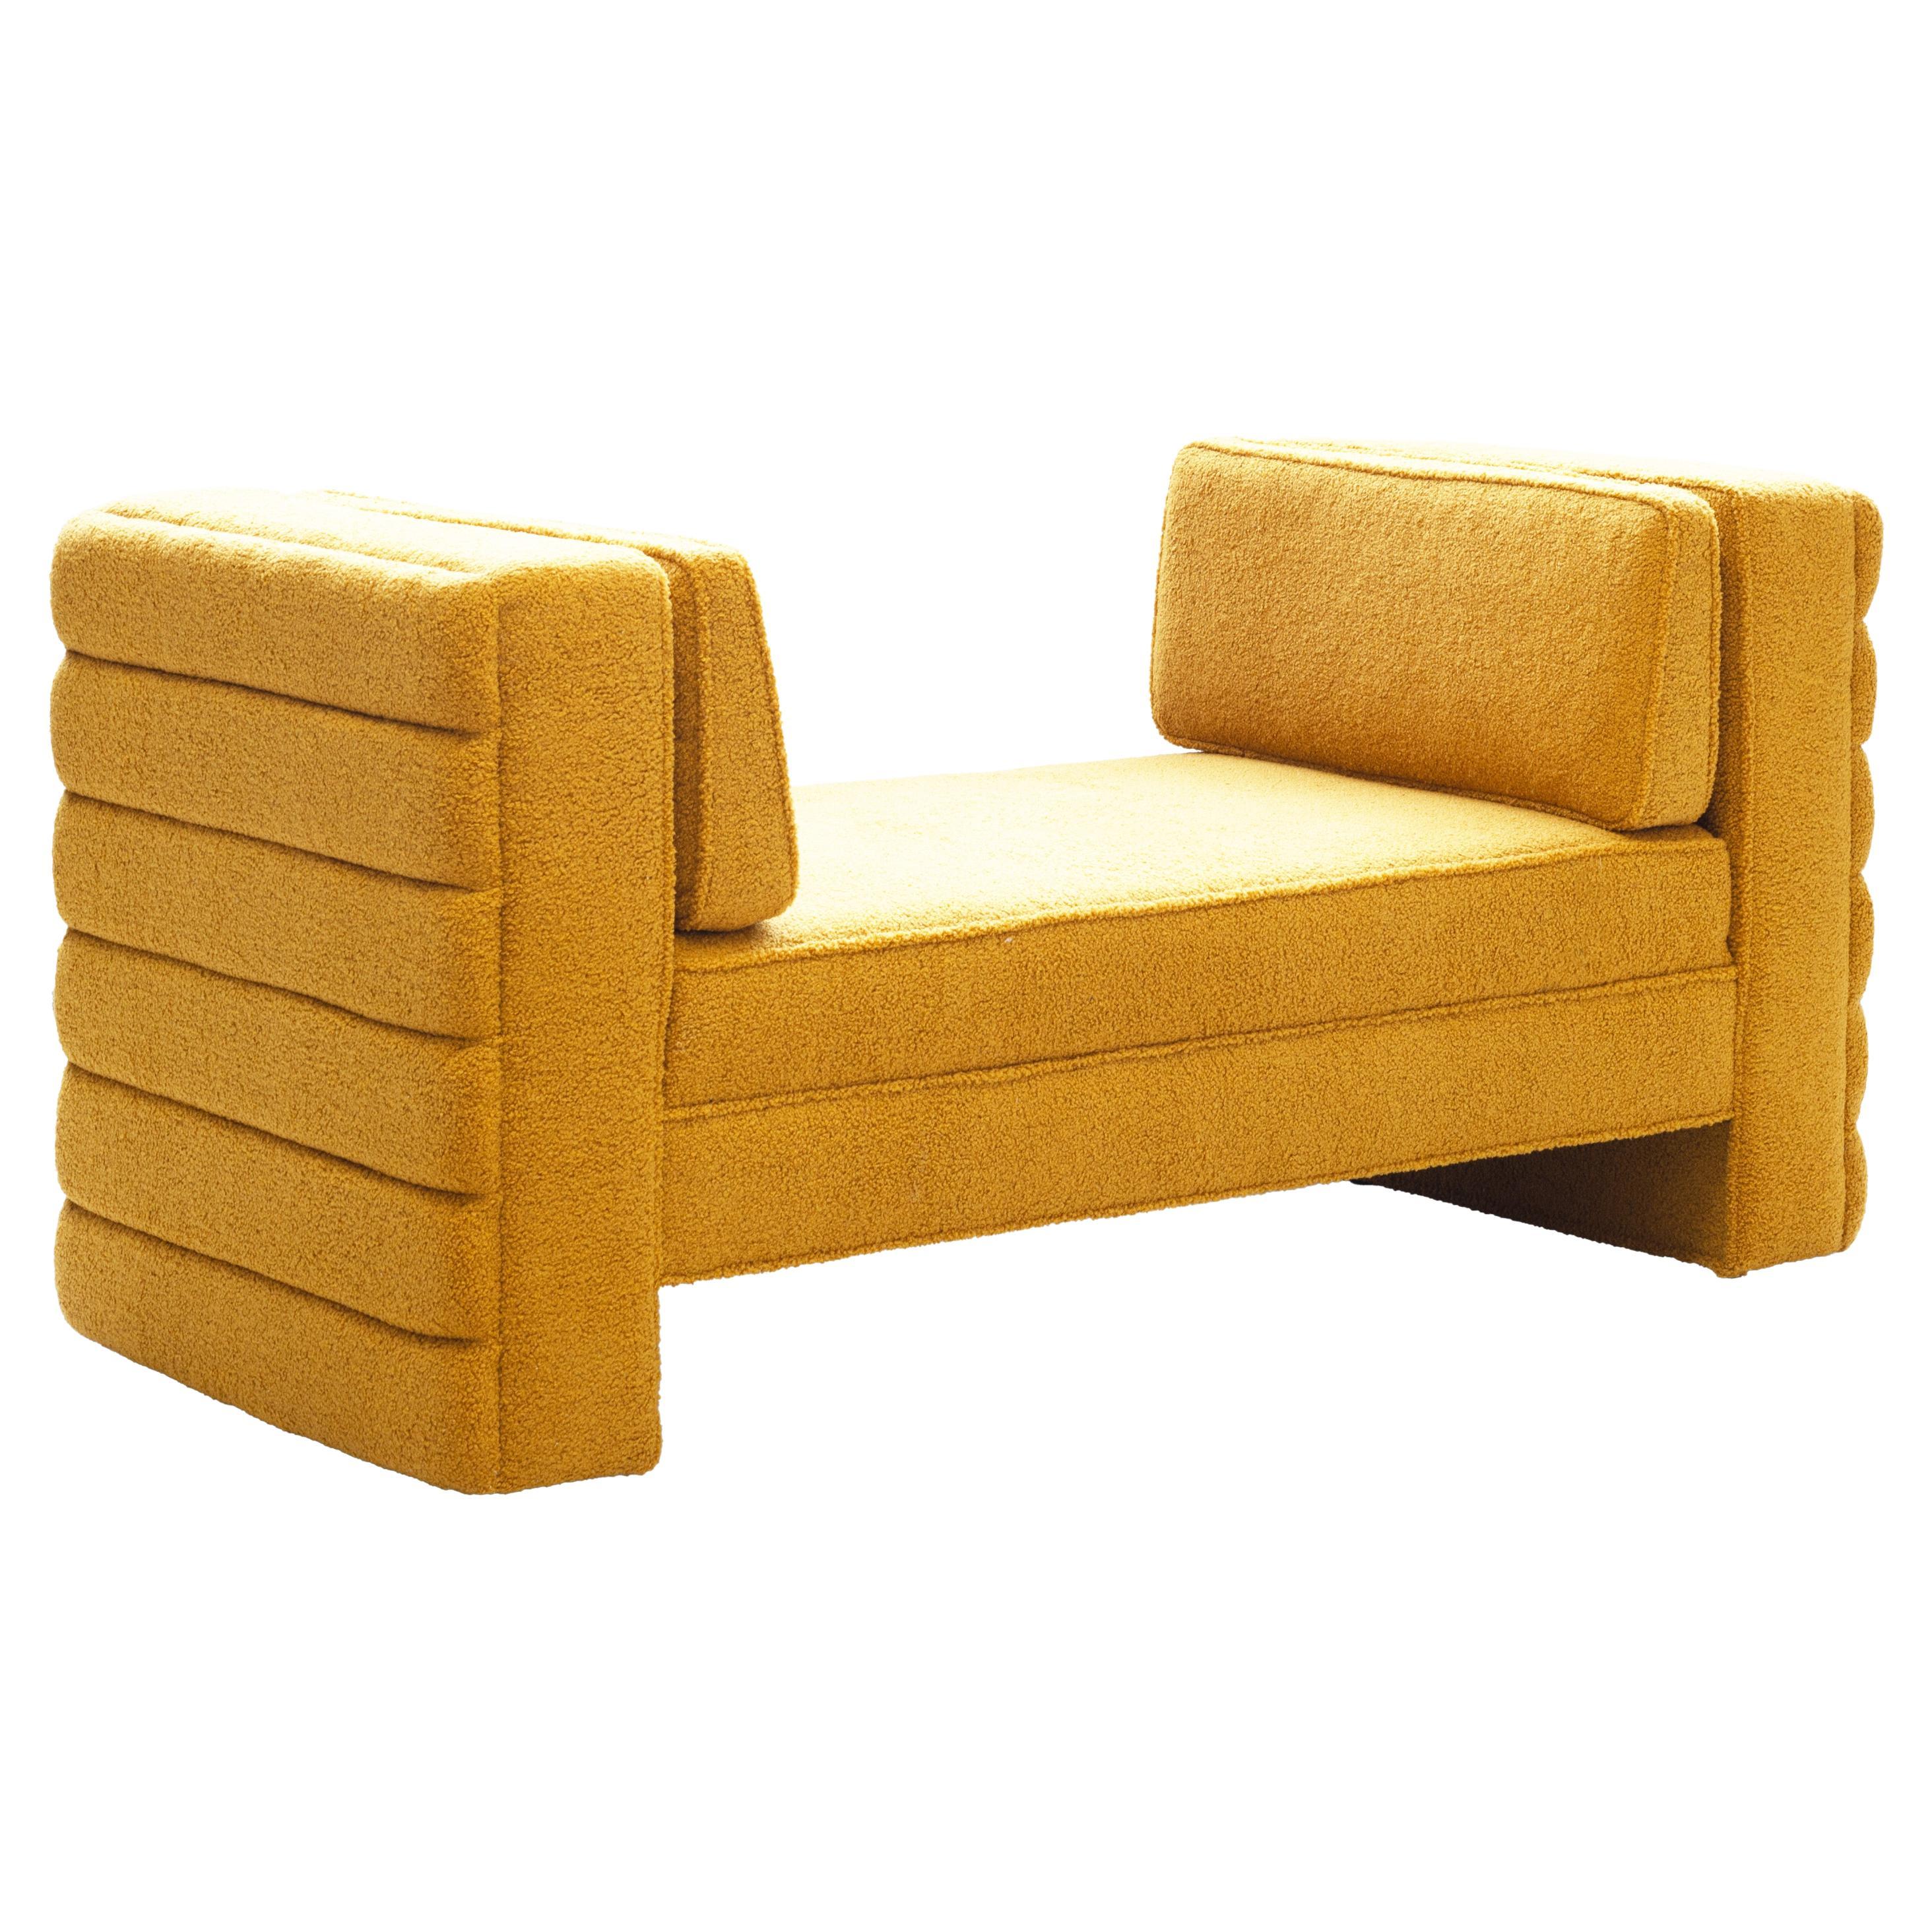 Nicholas Wolfe "Ovunque Bench" For Sale